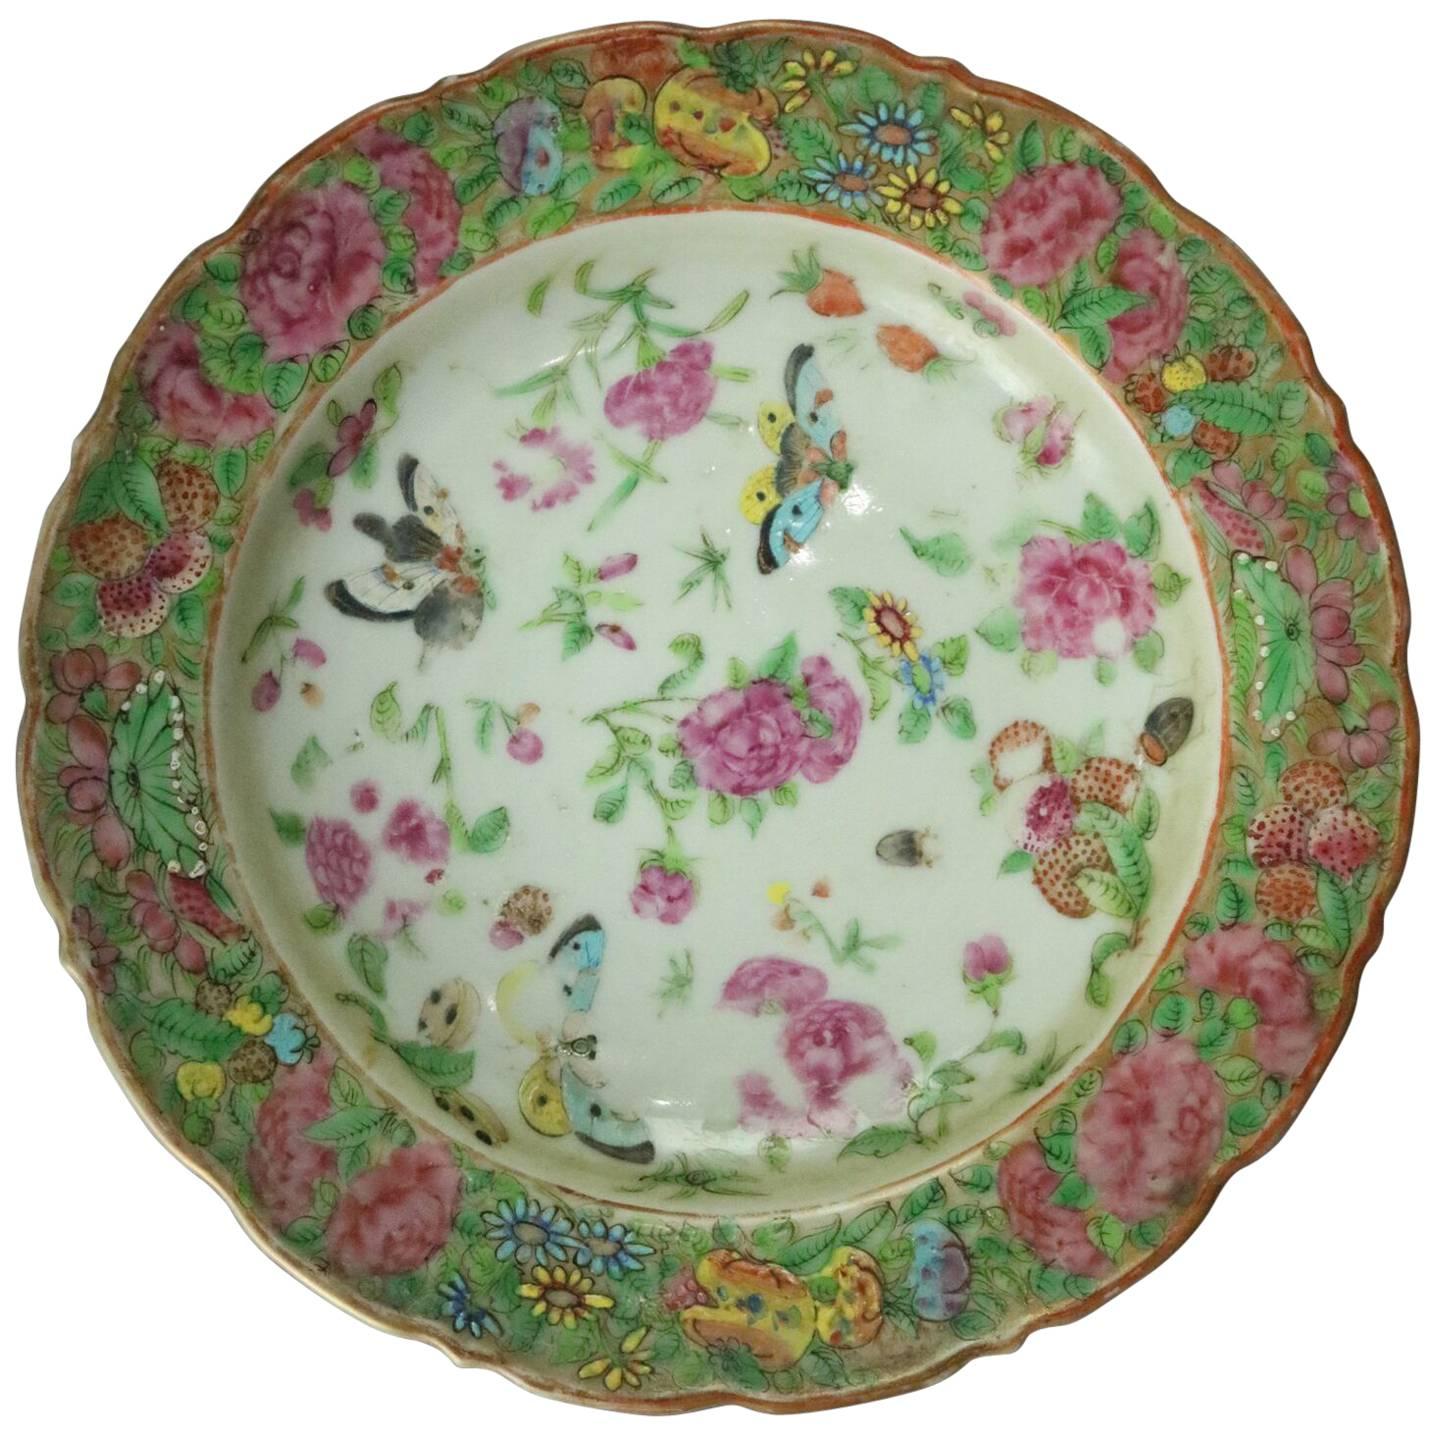 Chinese Famille Rose Porcelain Low Bowl, Floral with Butterflies, circa 1880